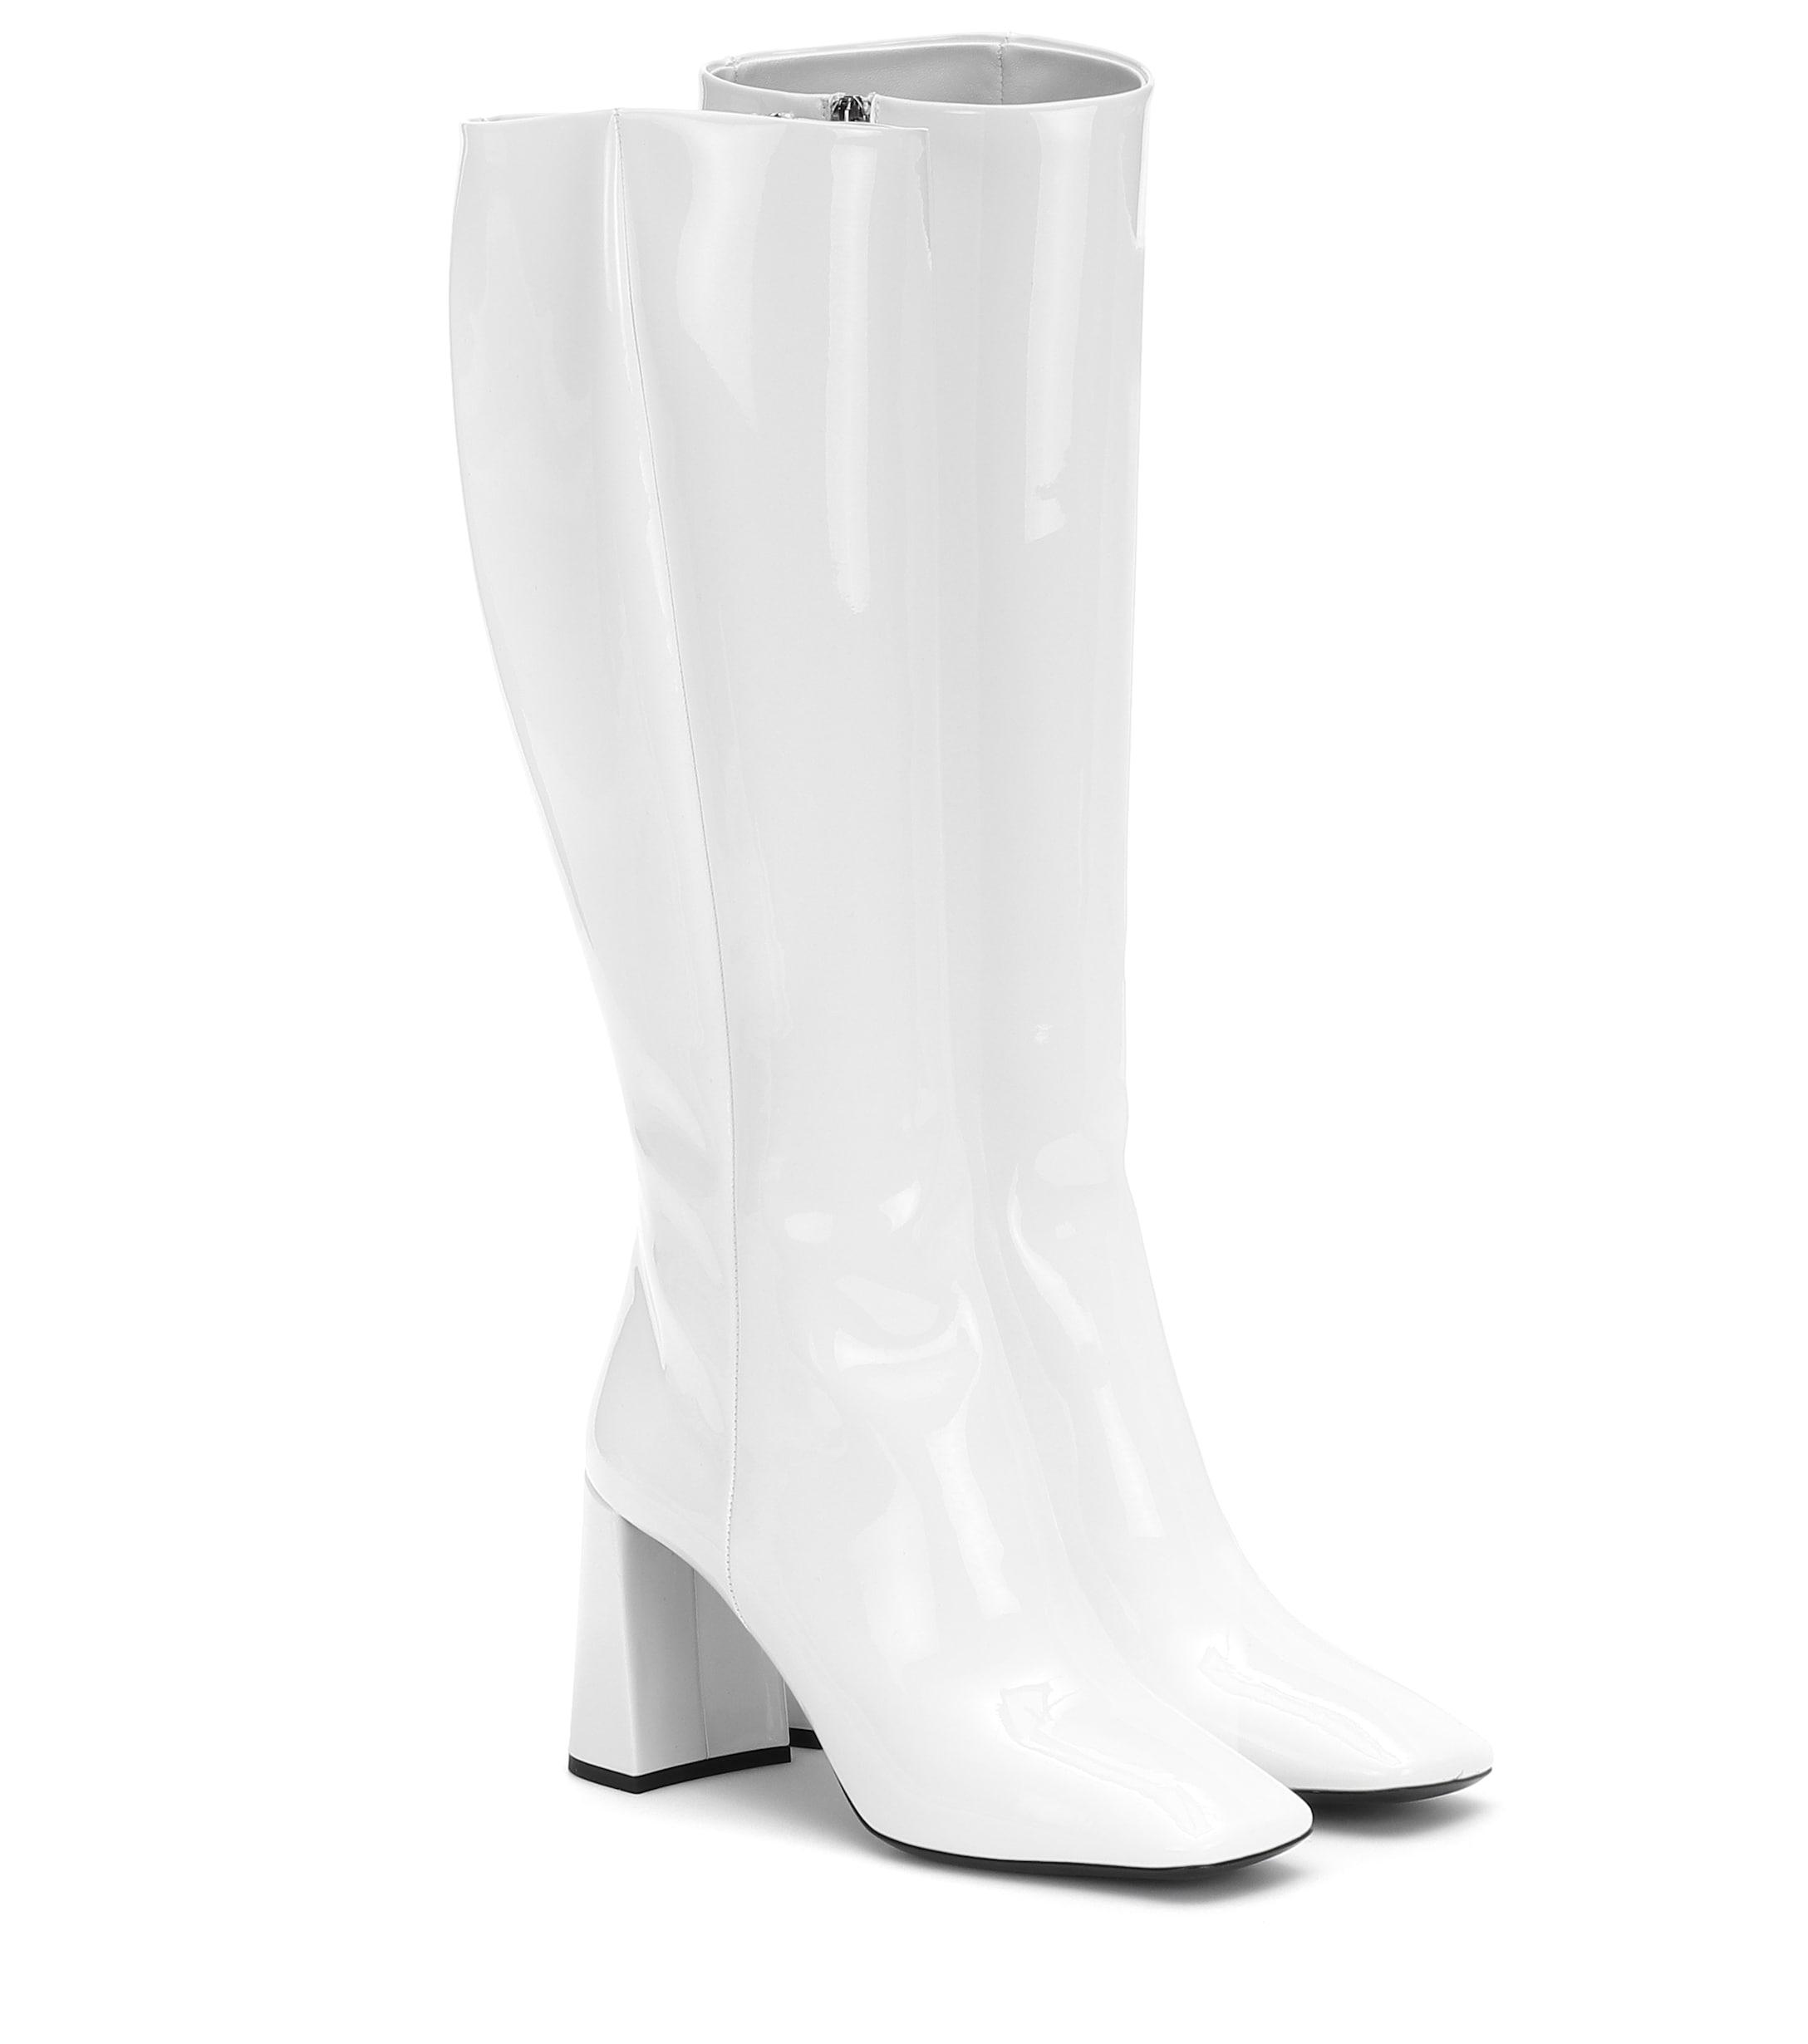 Prada Patent Leather Boots in White - Lyst